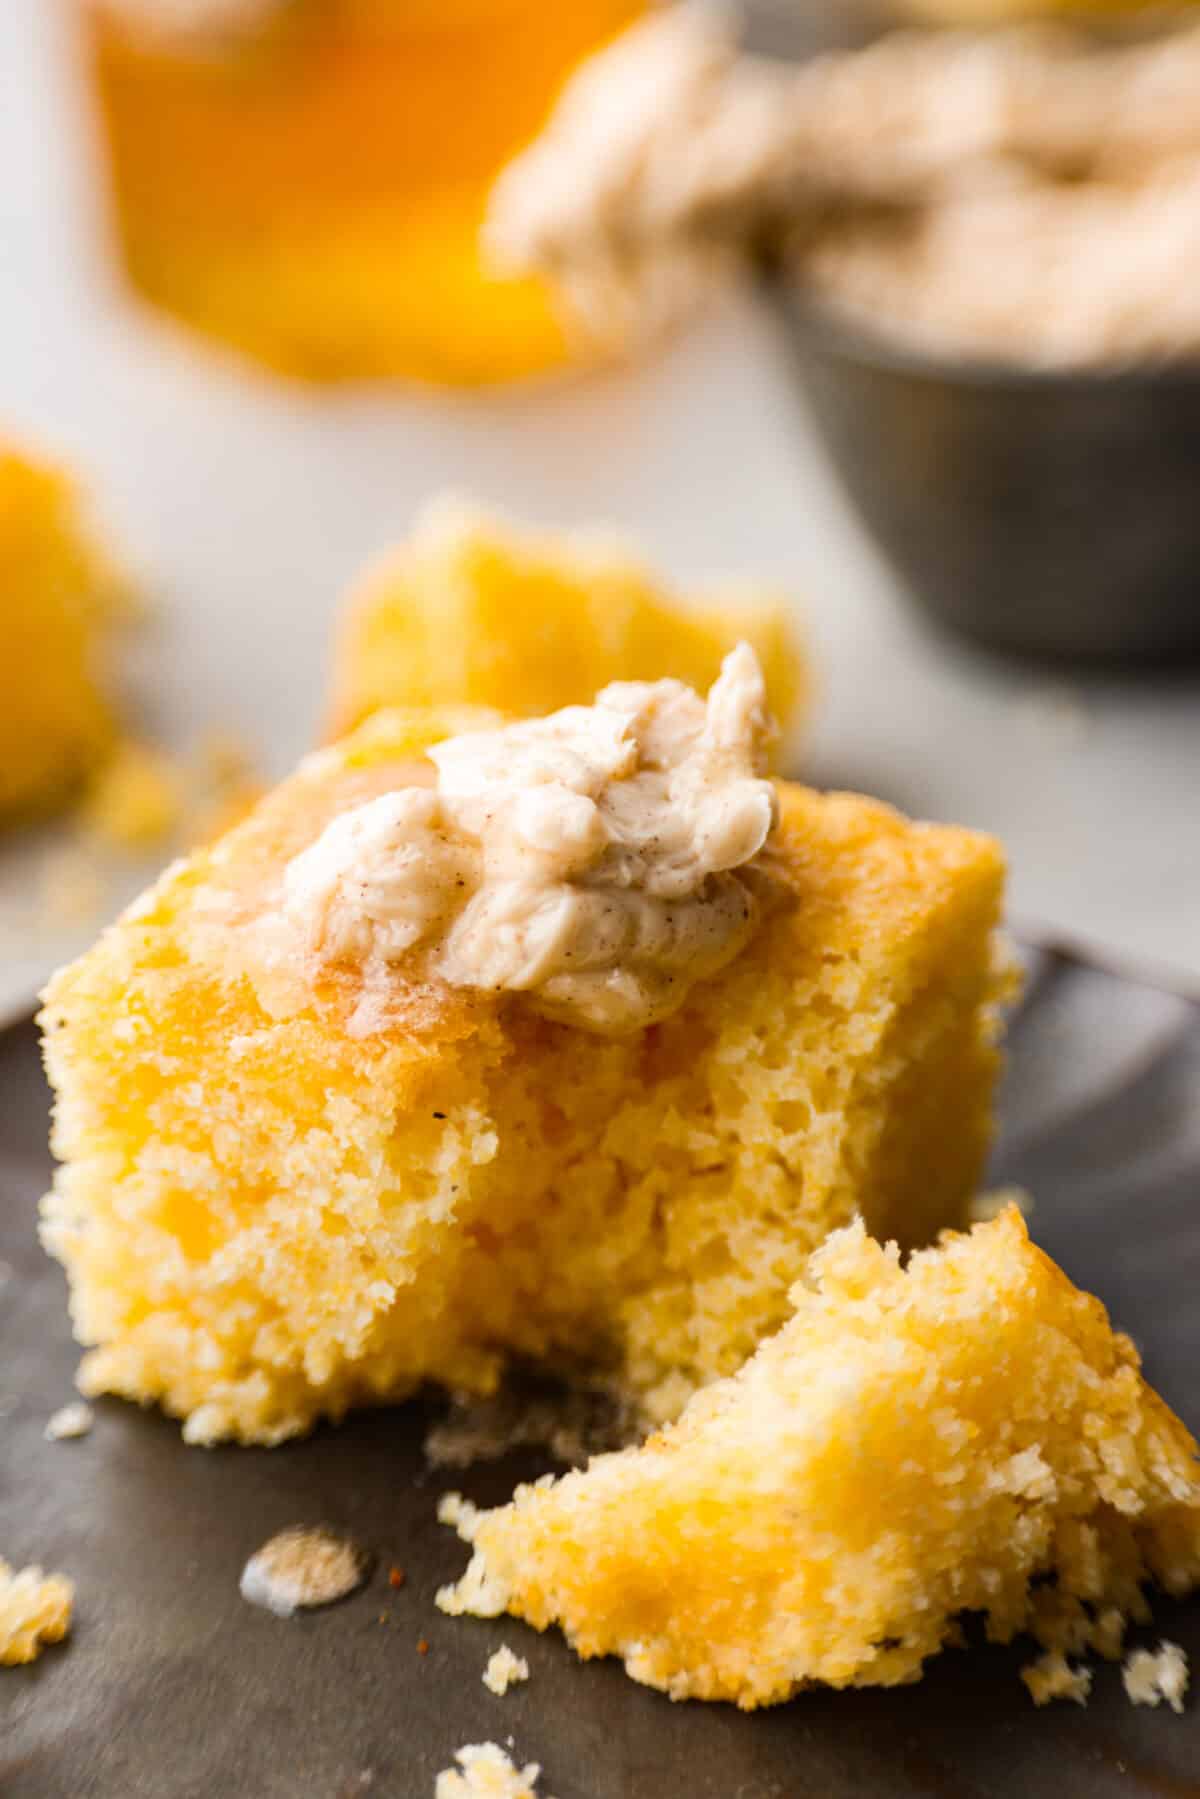 A square of cornbread topped with a dollop of the sweet spread.